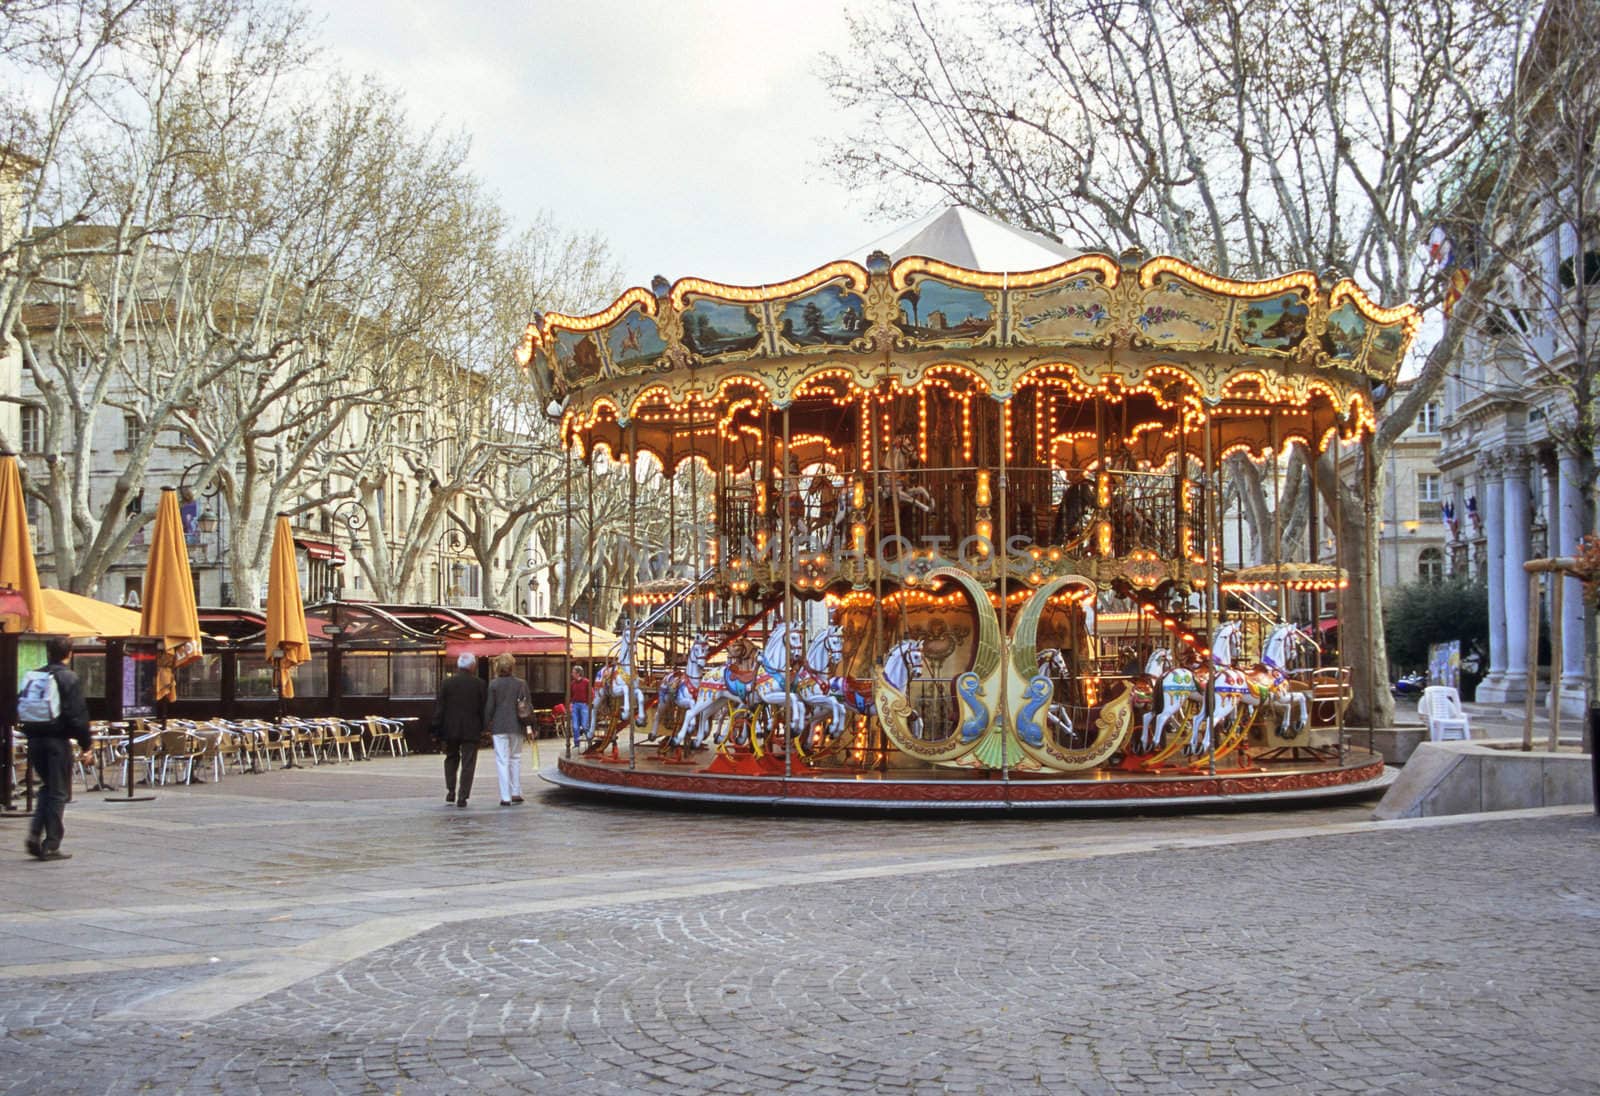 An old fashioned carousel sits in the middle of the square in Avignon, France.